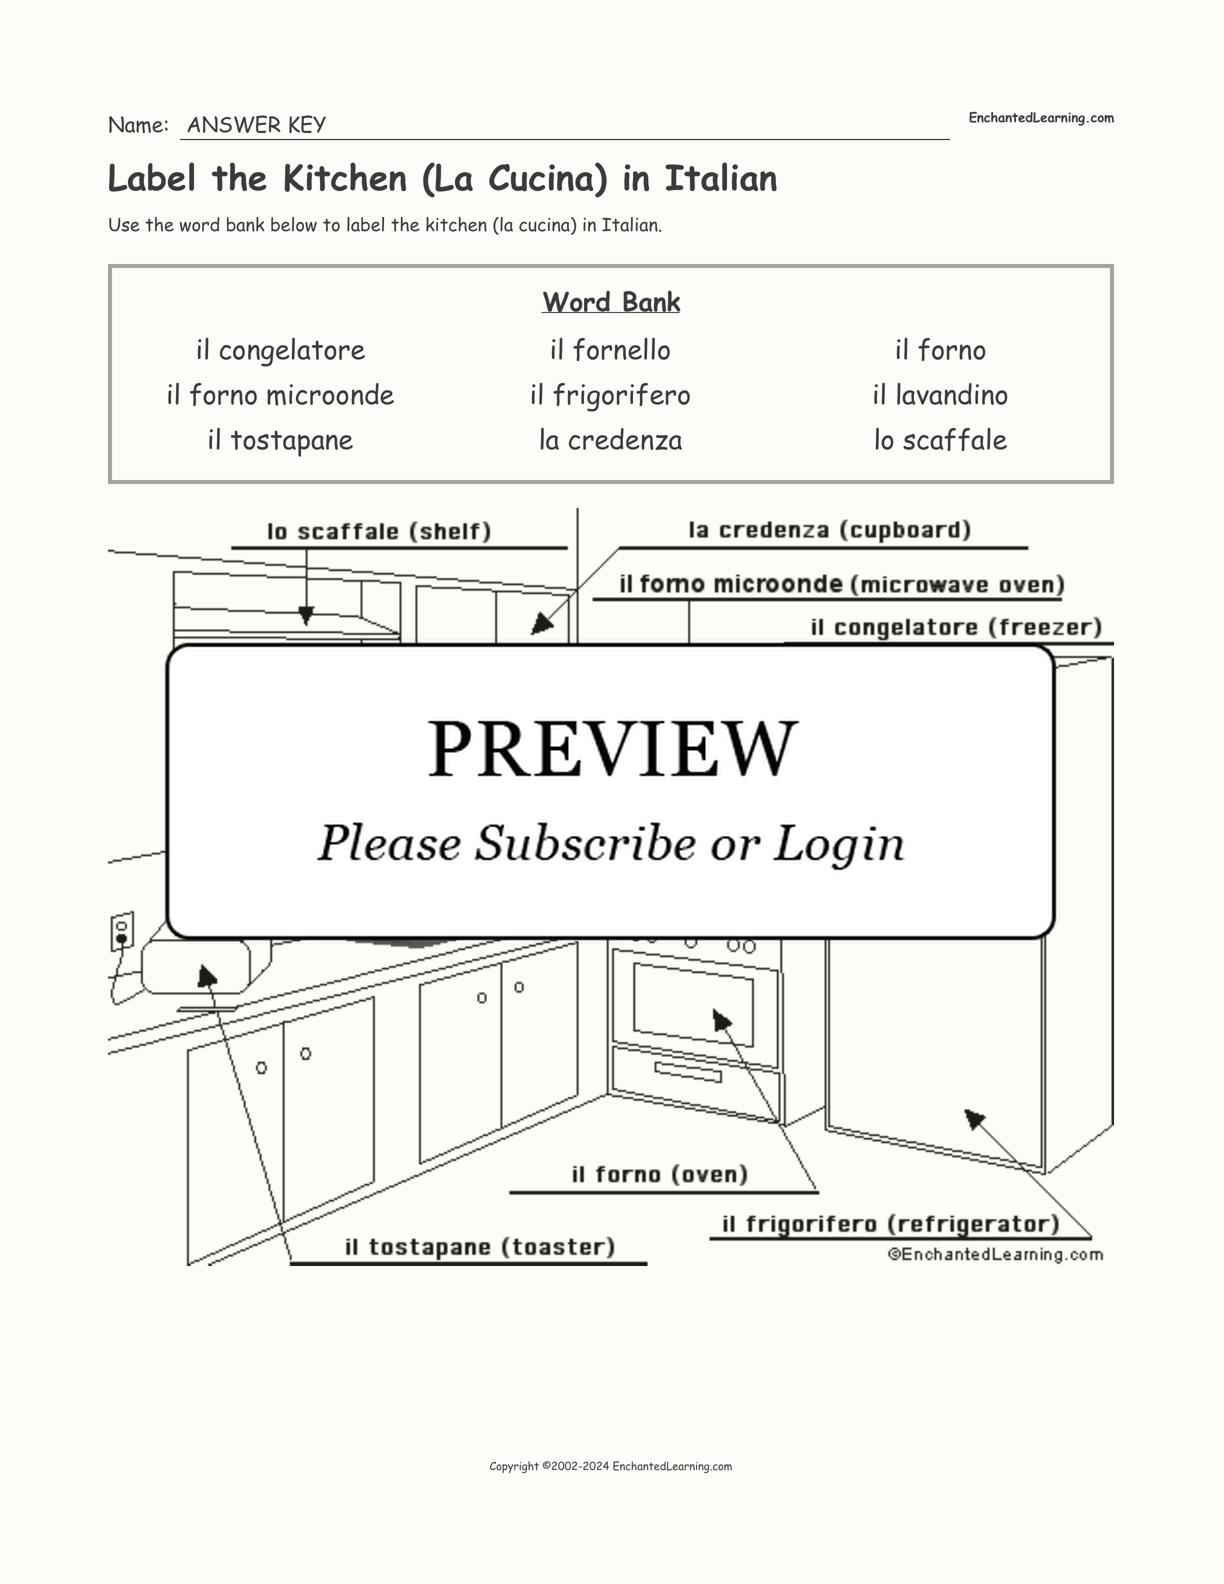 Label the Kitchen (La Cucina) in Italian interactive worksheet page 2